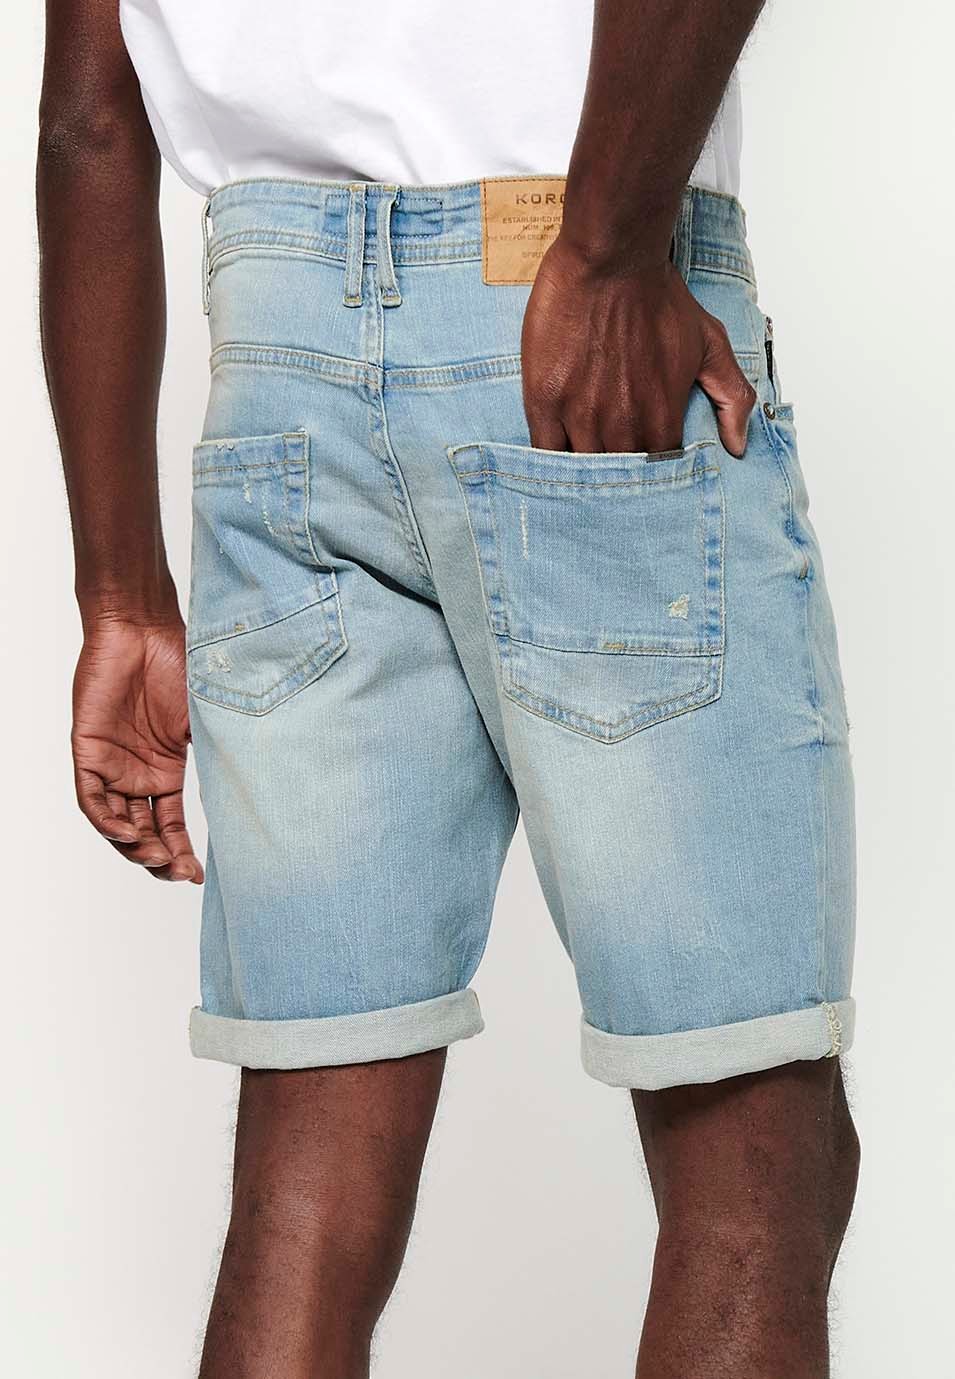 Shorts with turn-up finish and front closure with zipper and button and five pockets, one blue pocket pocket for men 6